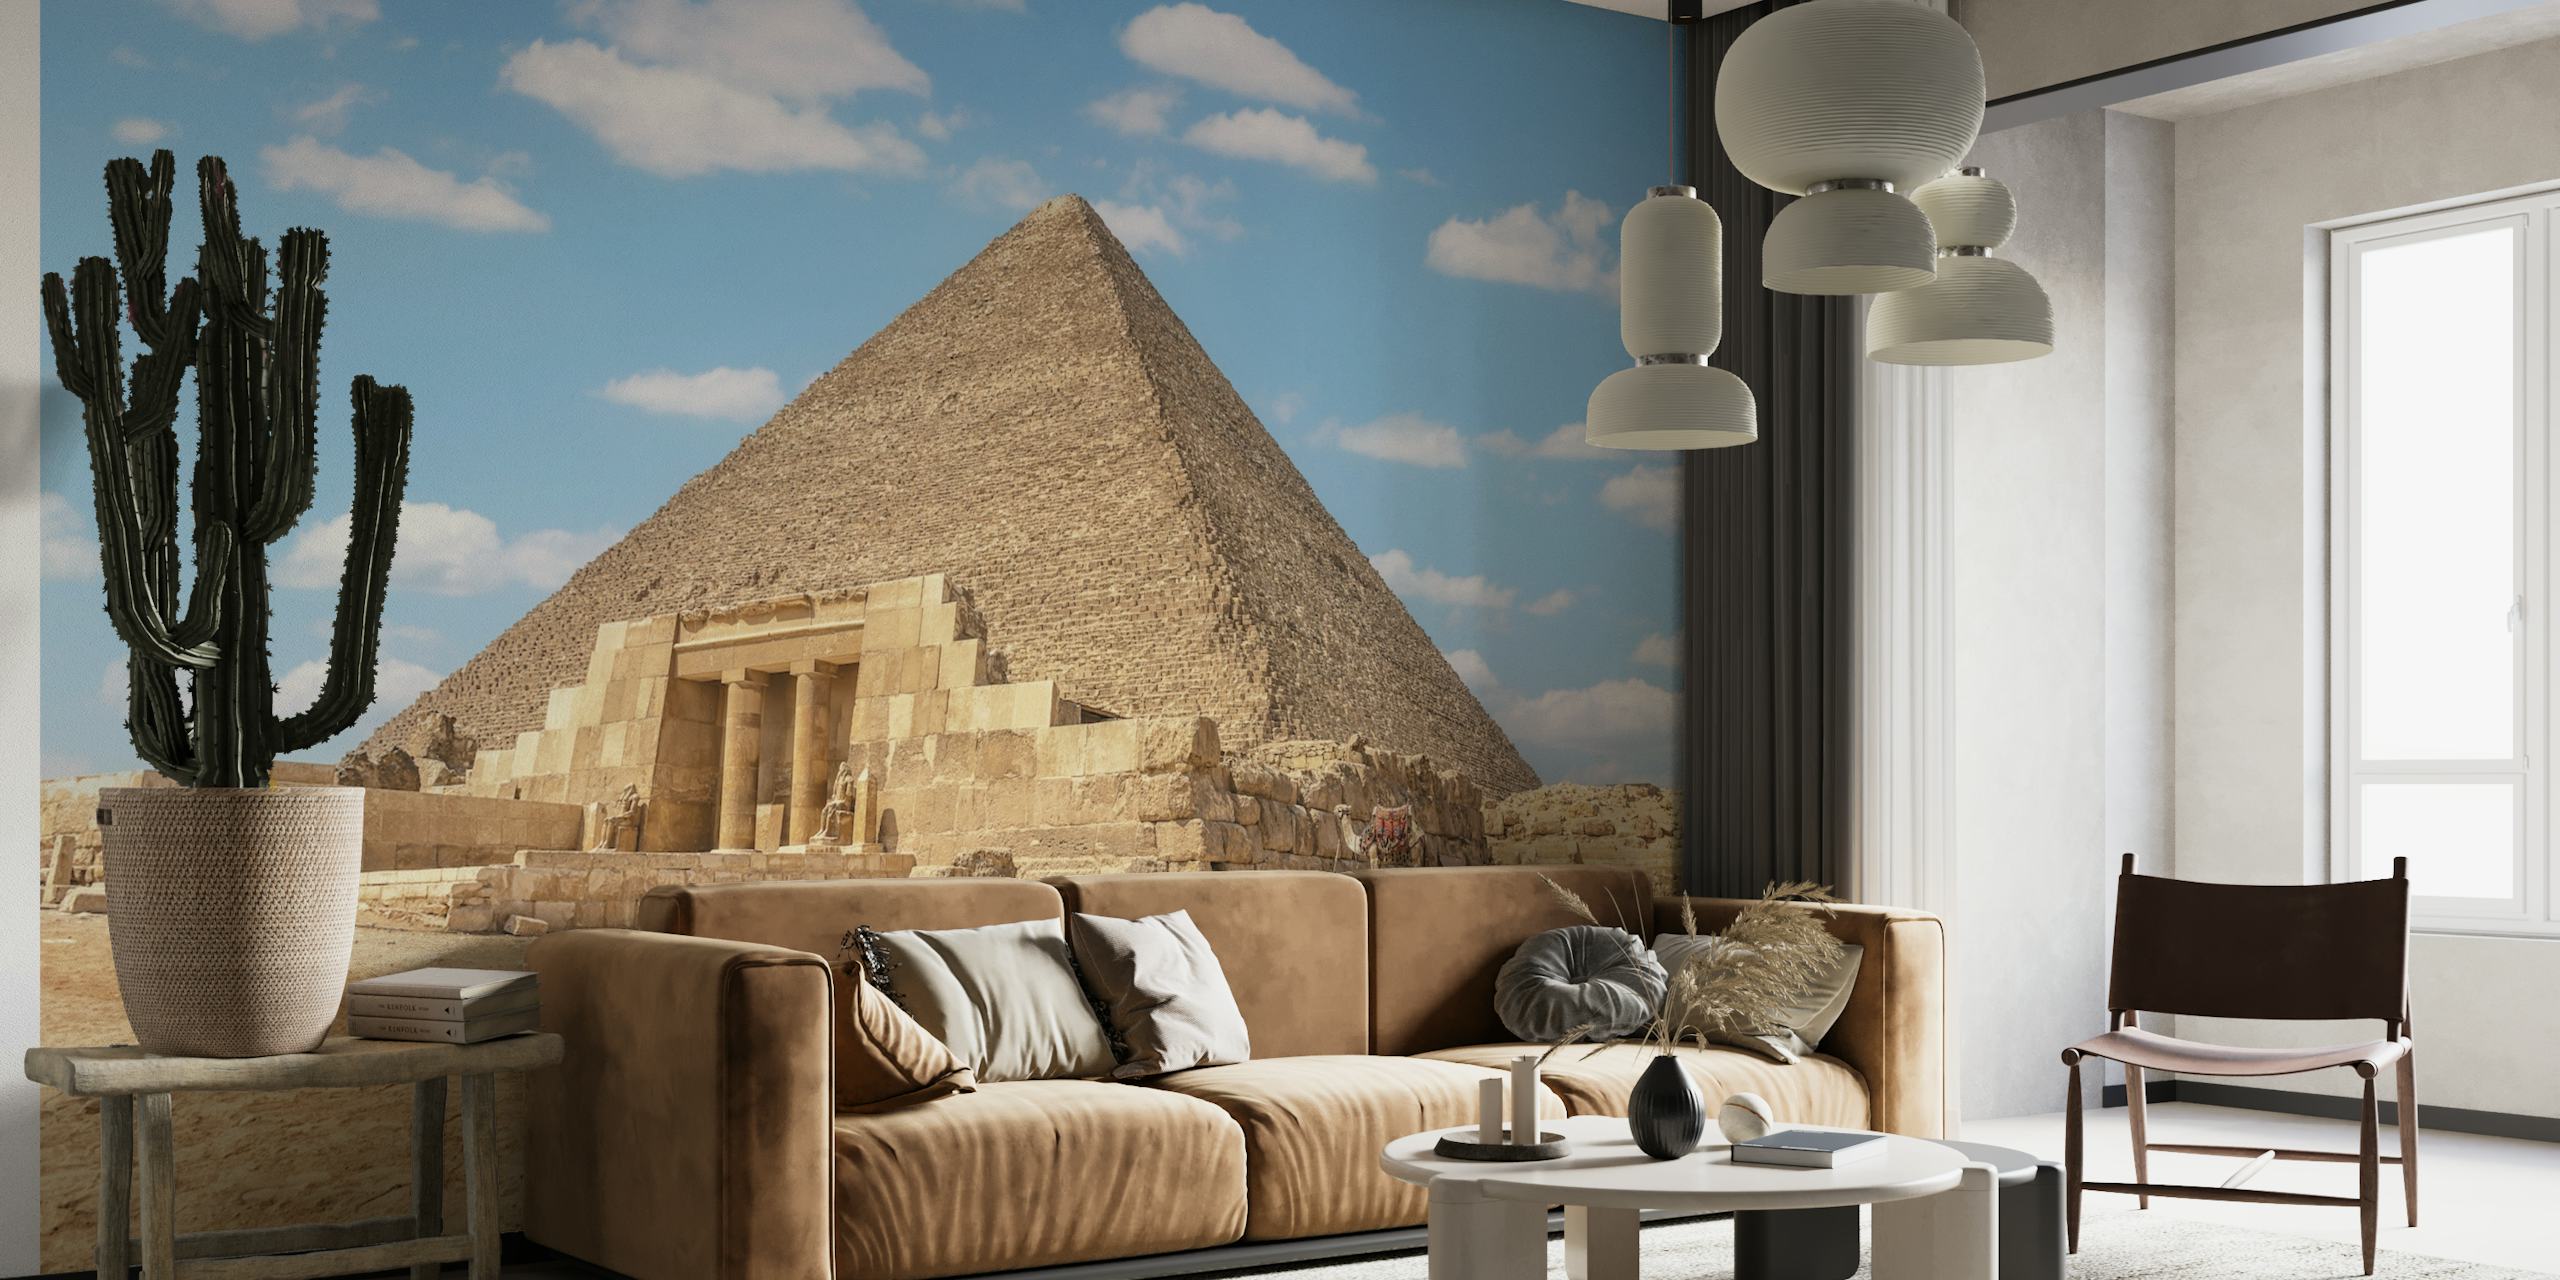 Great Pyramid wall mural depicting the ancient Egyptian pyramid under a clear sky on happywall.com